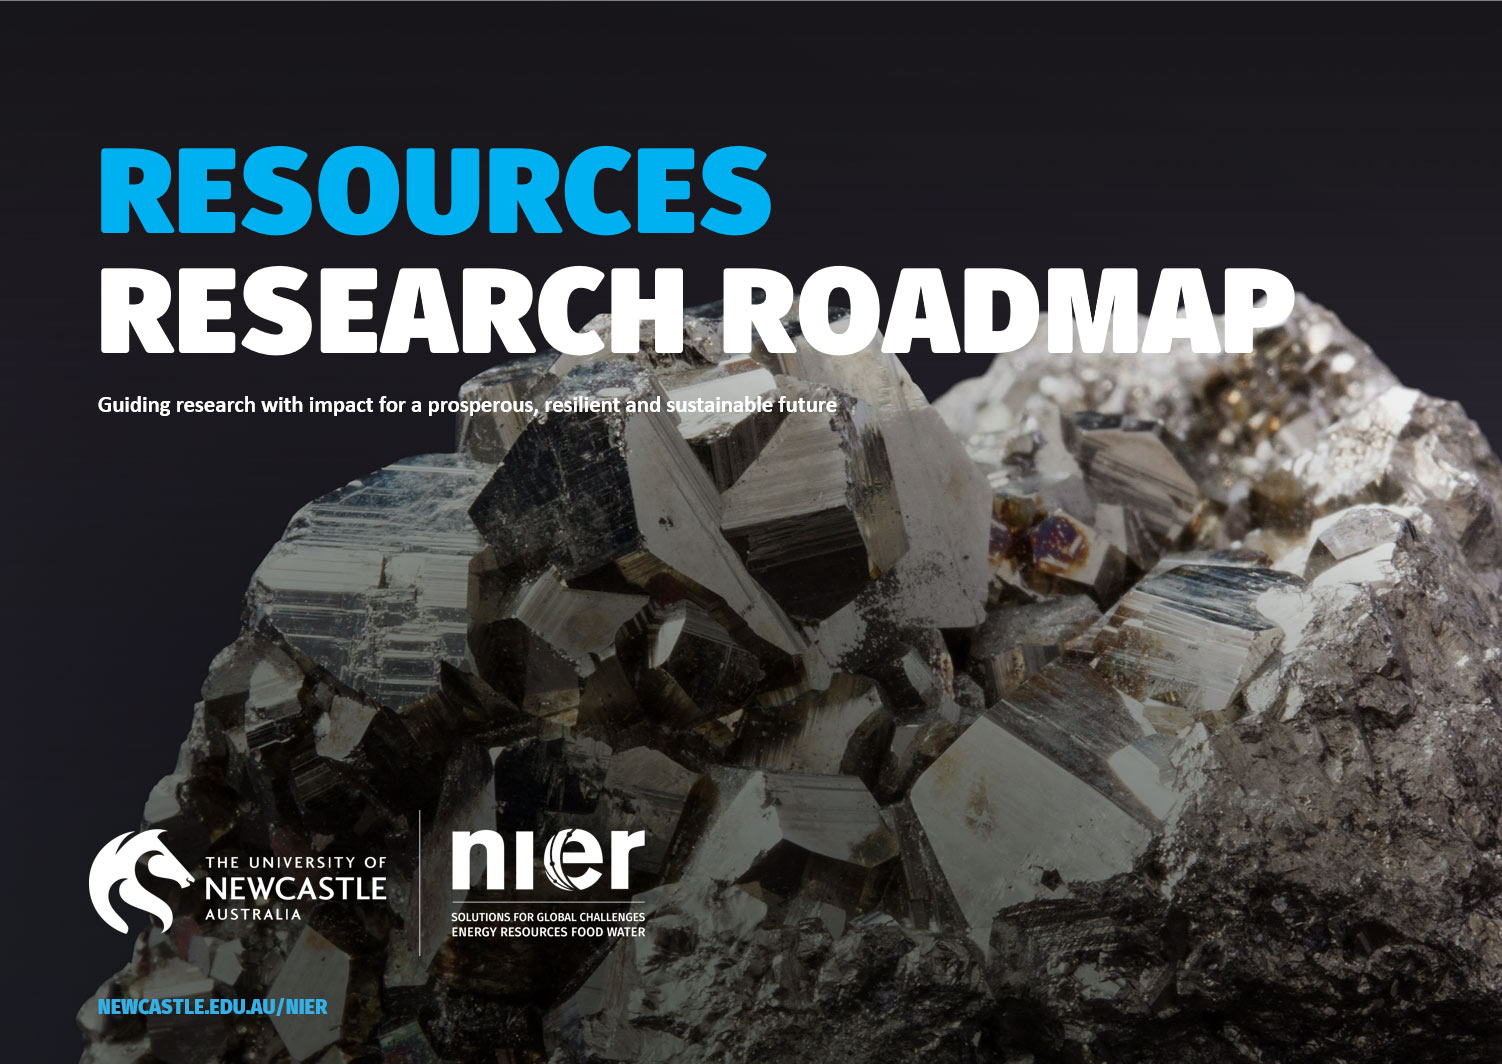 Resources Research Roadmap